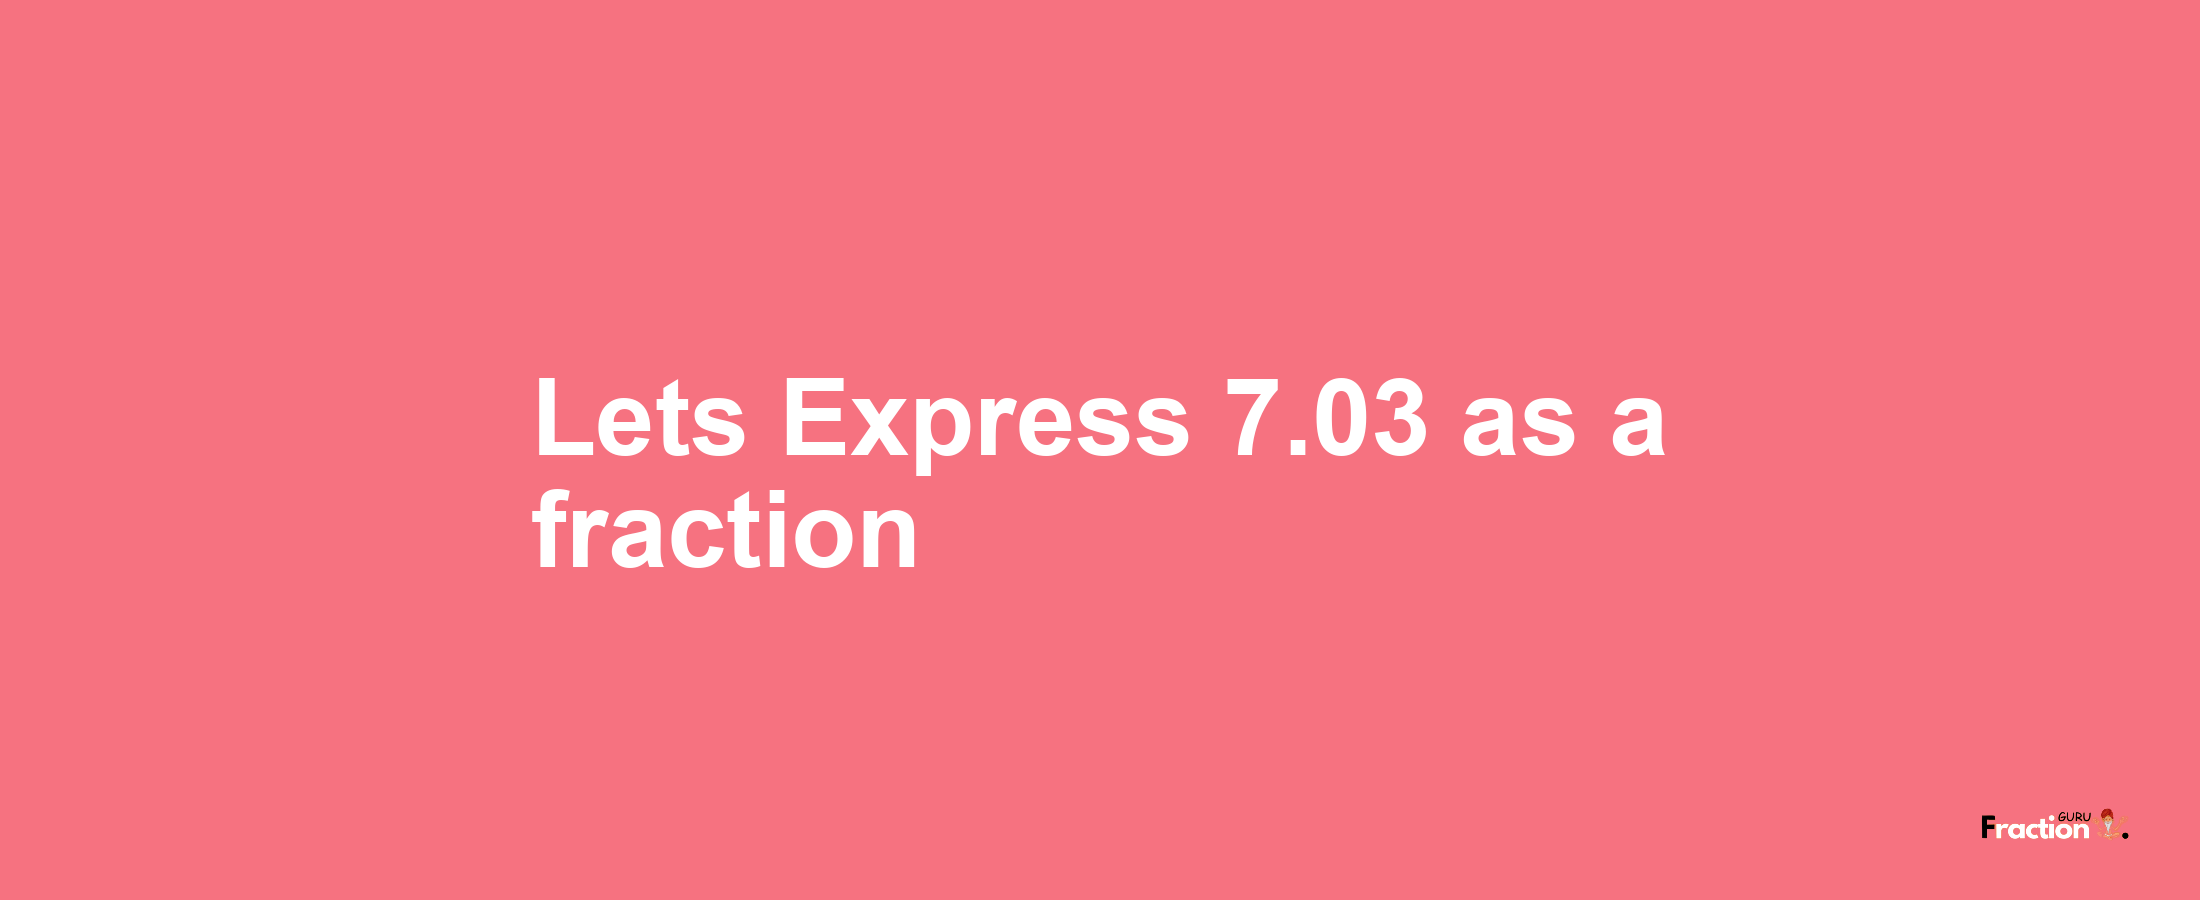 Lets Express 7.03 as afraction